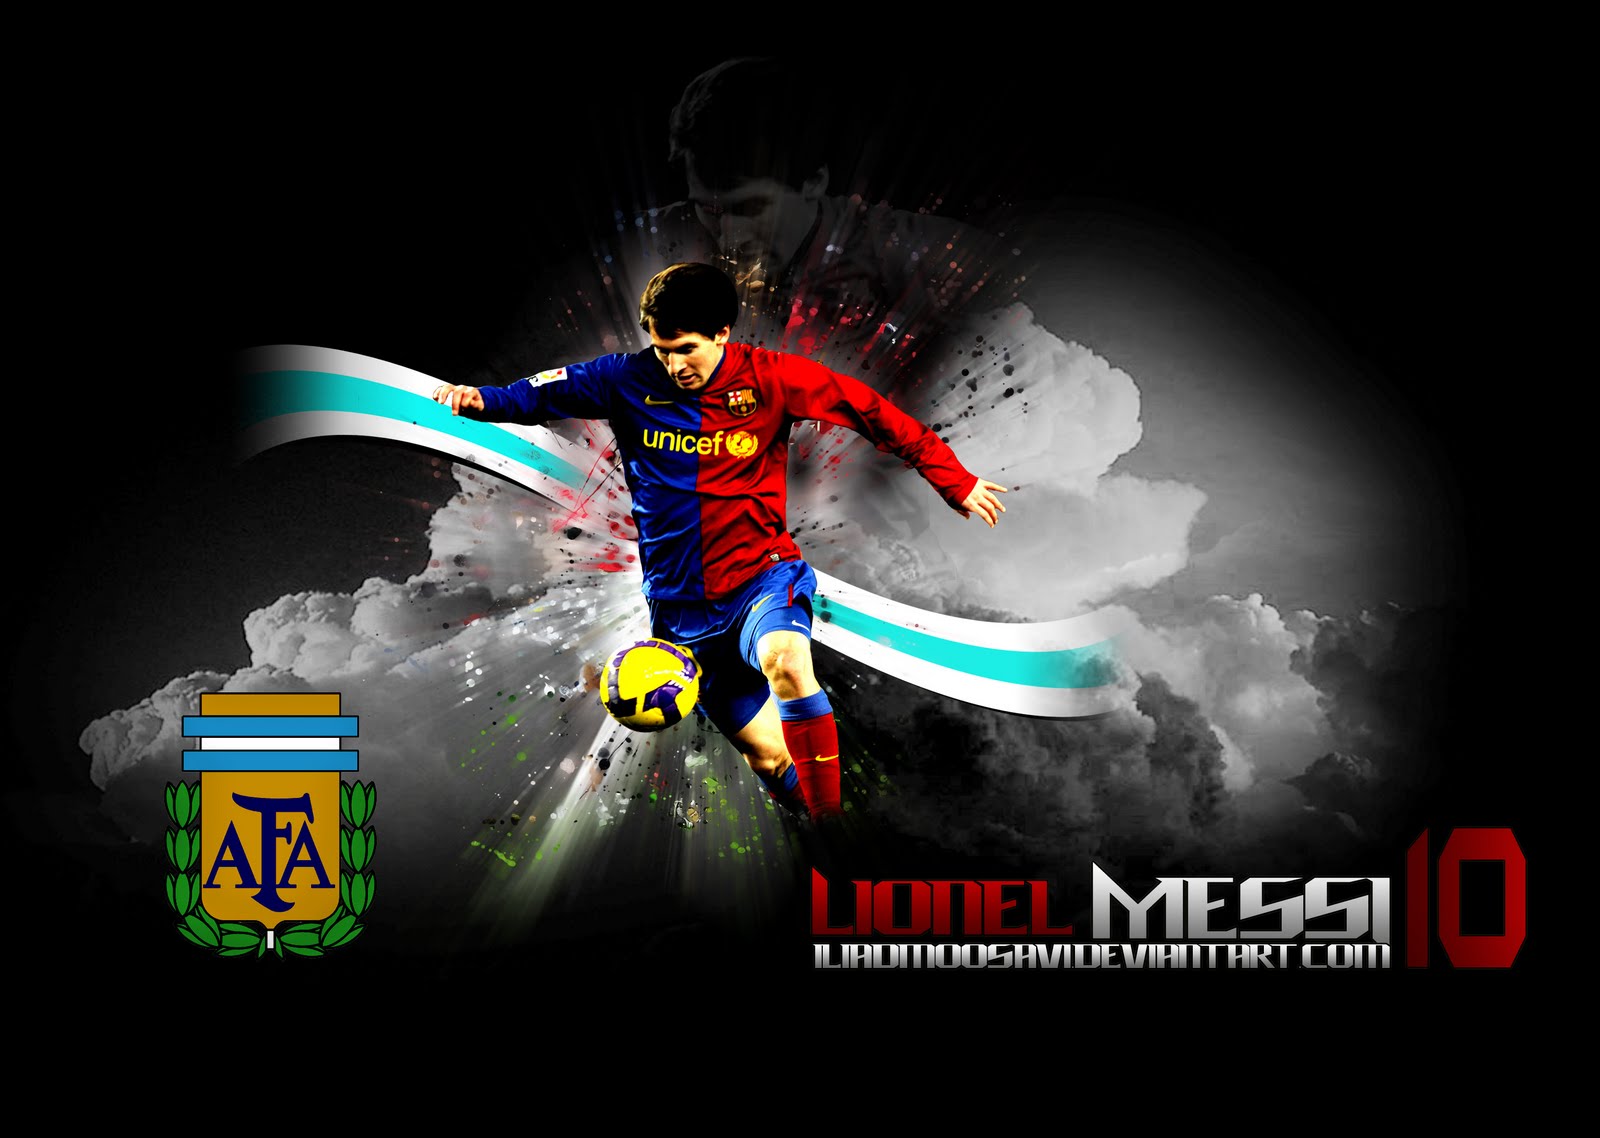  other wallpapers of Lionel Messi wallpapers as often as possible